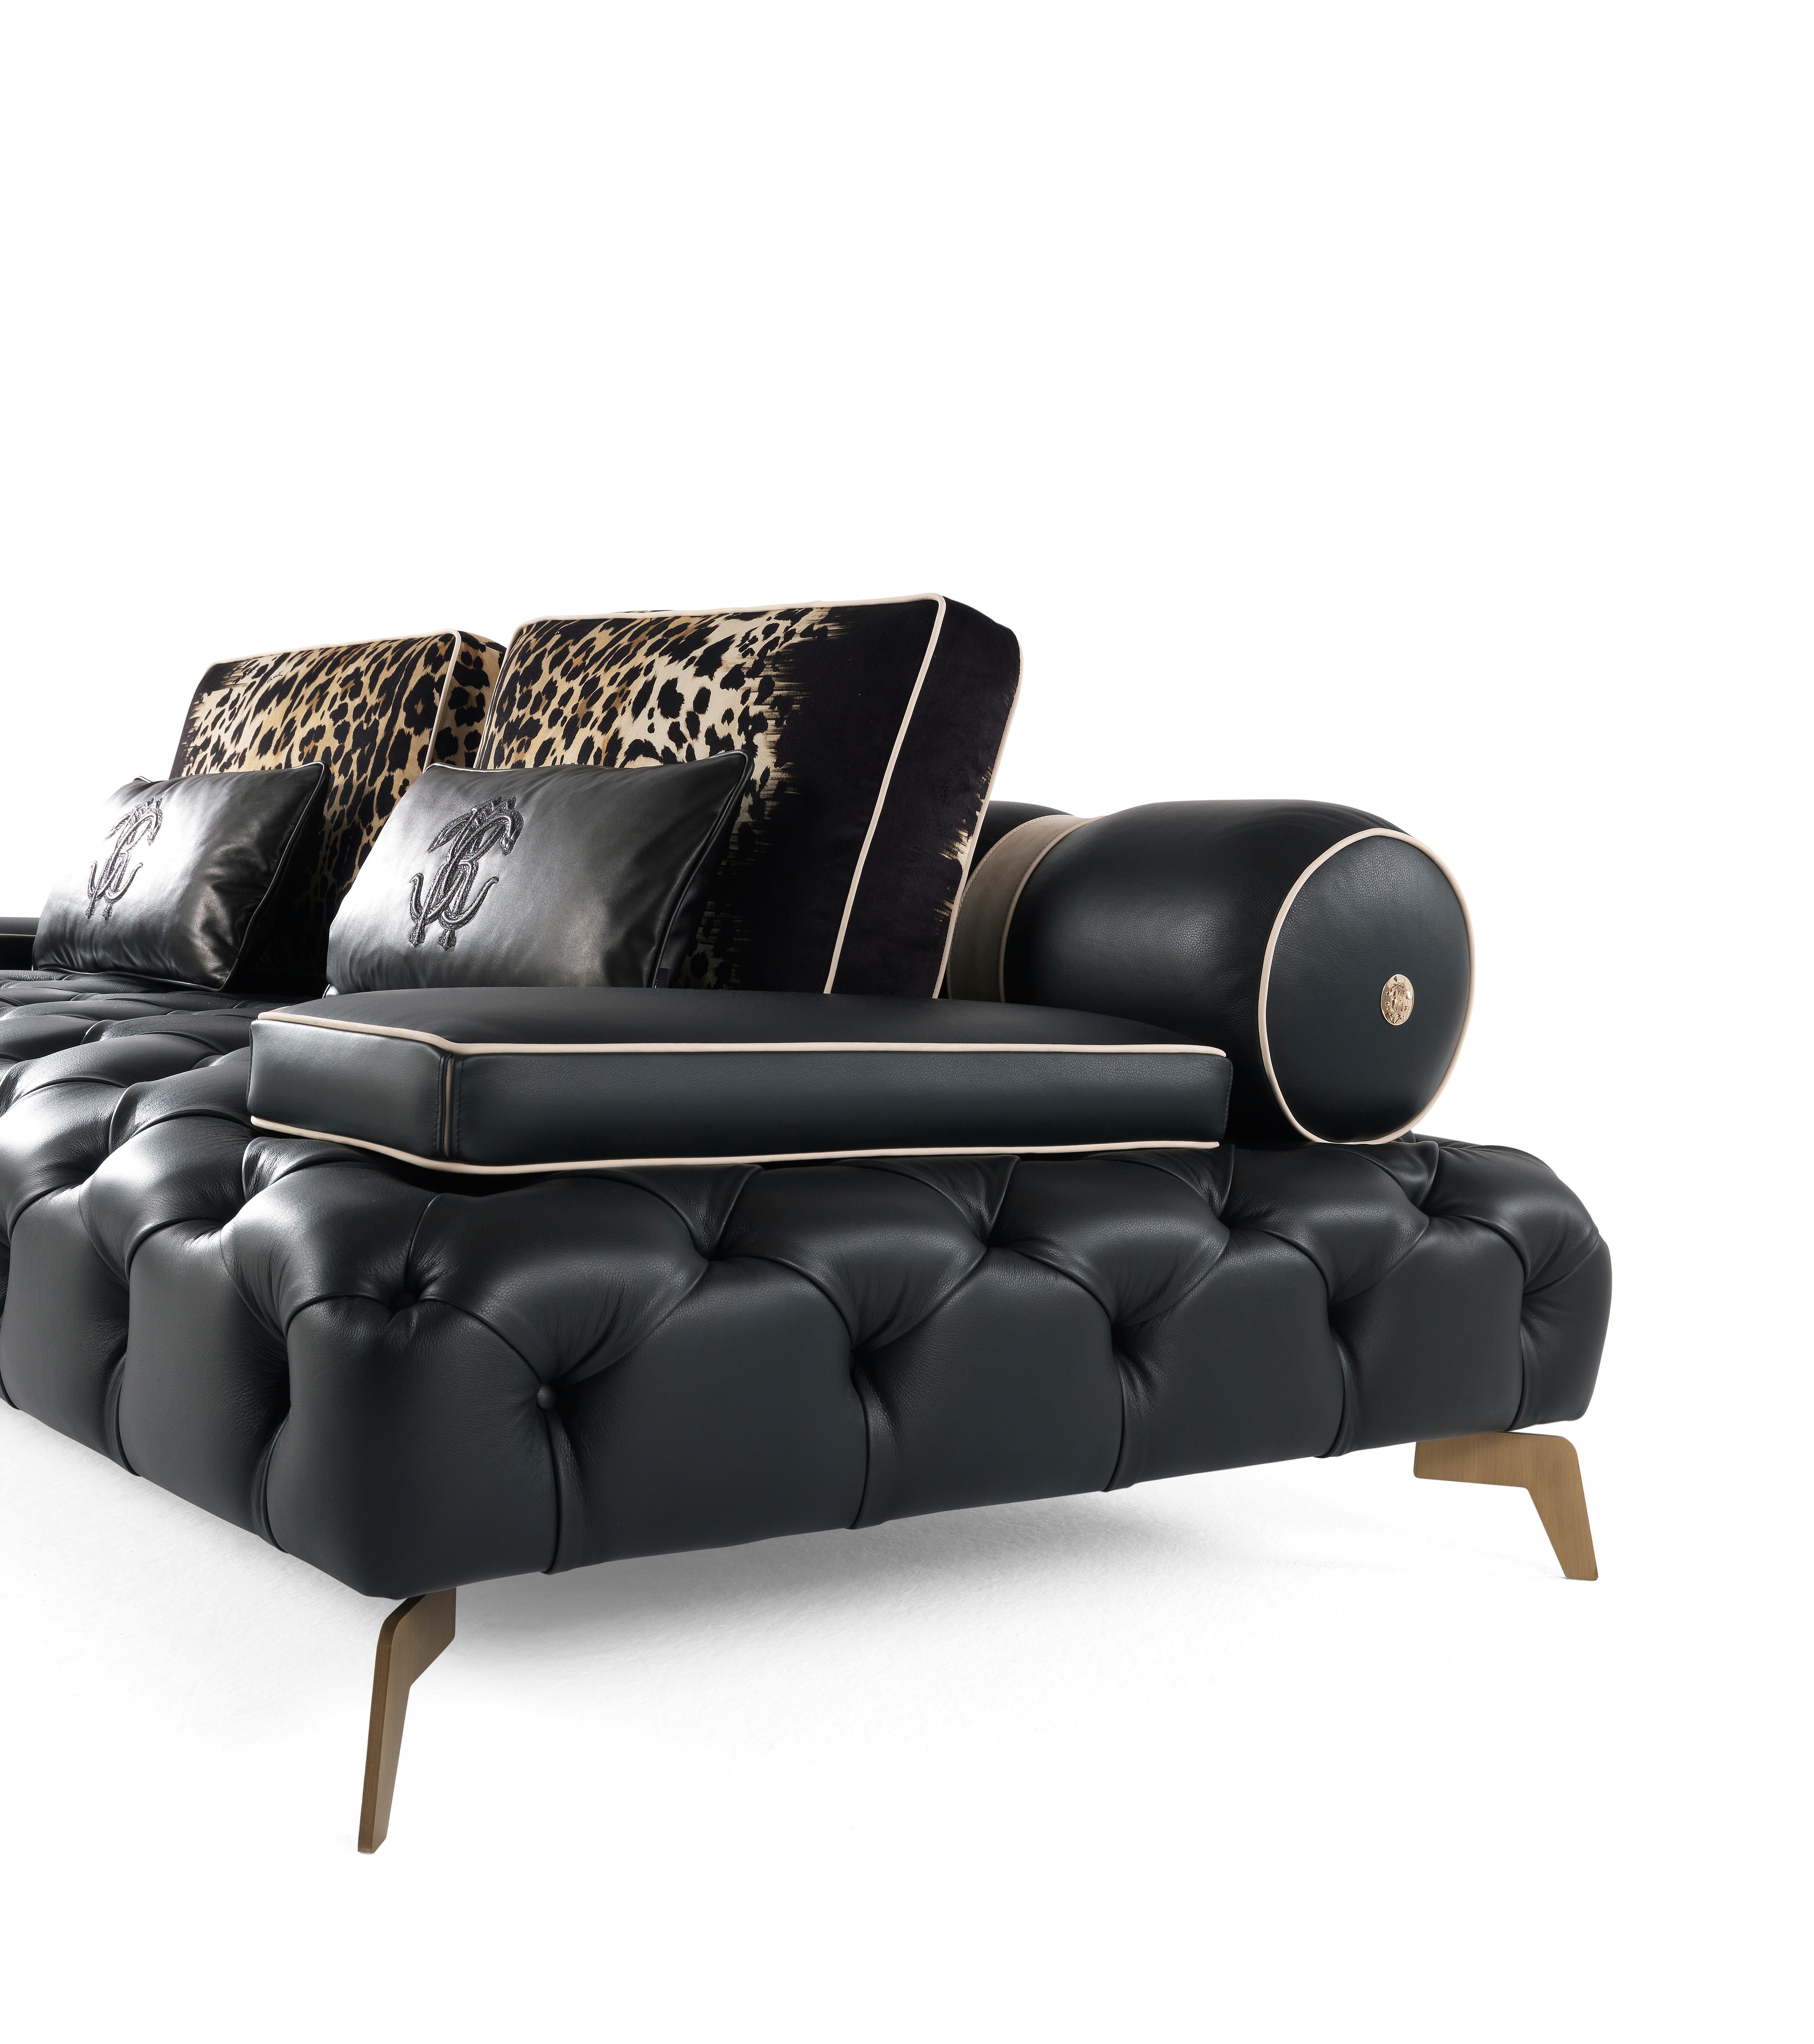 Modern 21st Century Darlington Sofa in Black Leather by Roberto Cavalli Home Interiors For Sale